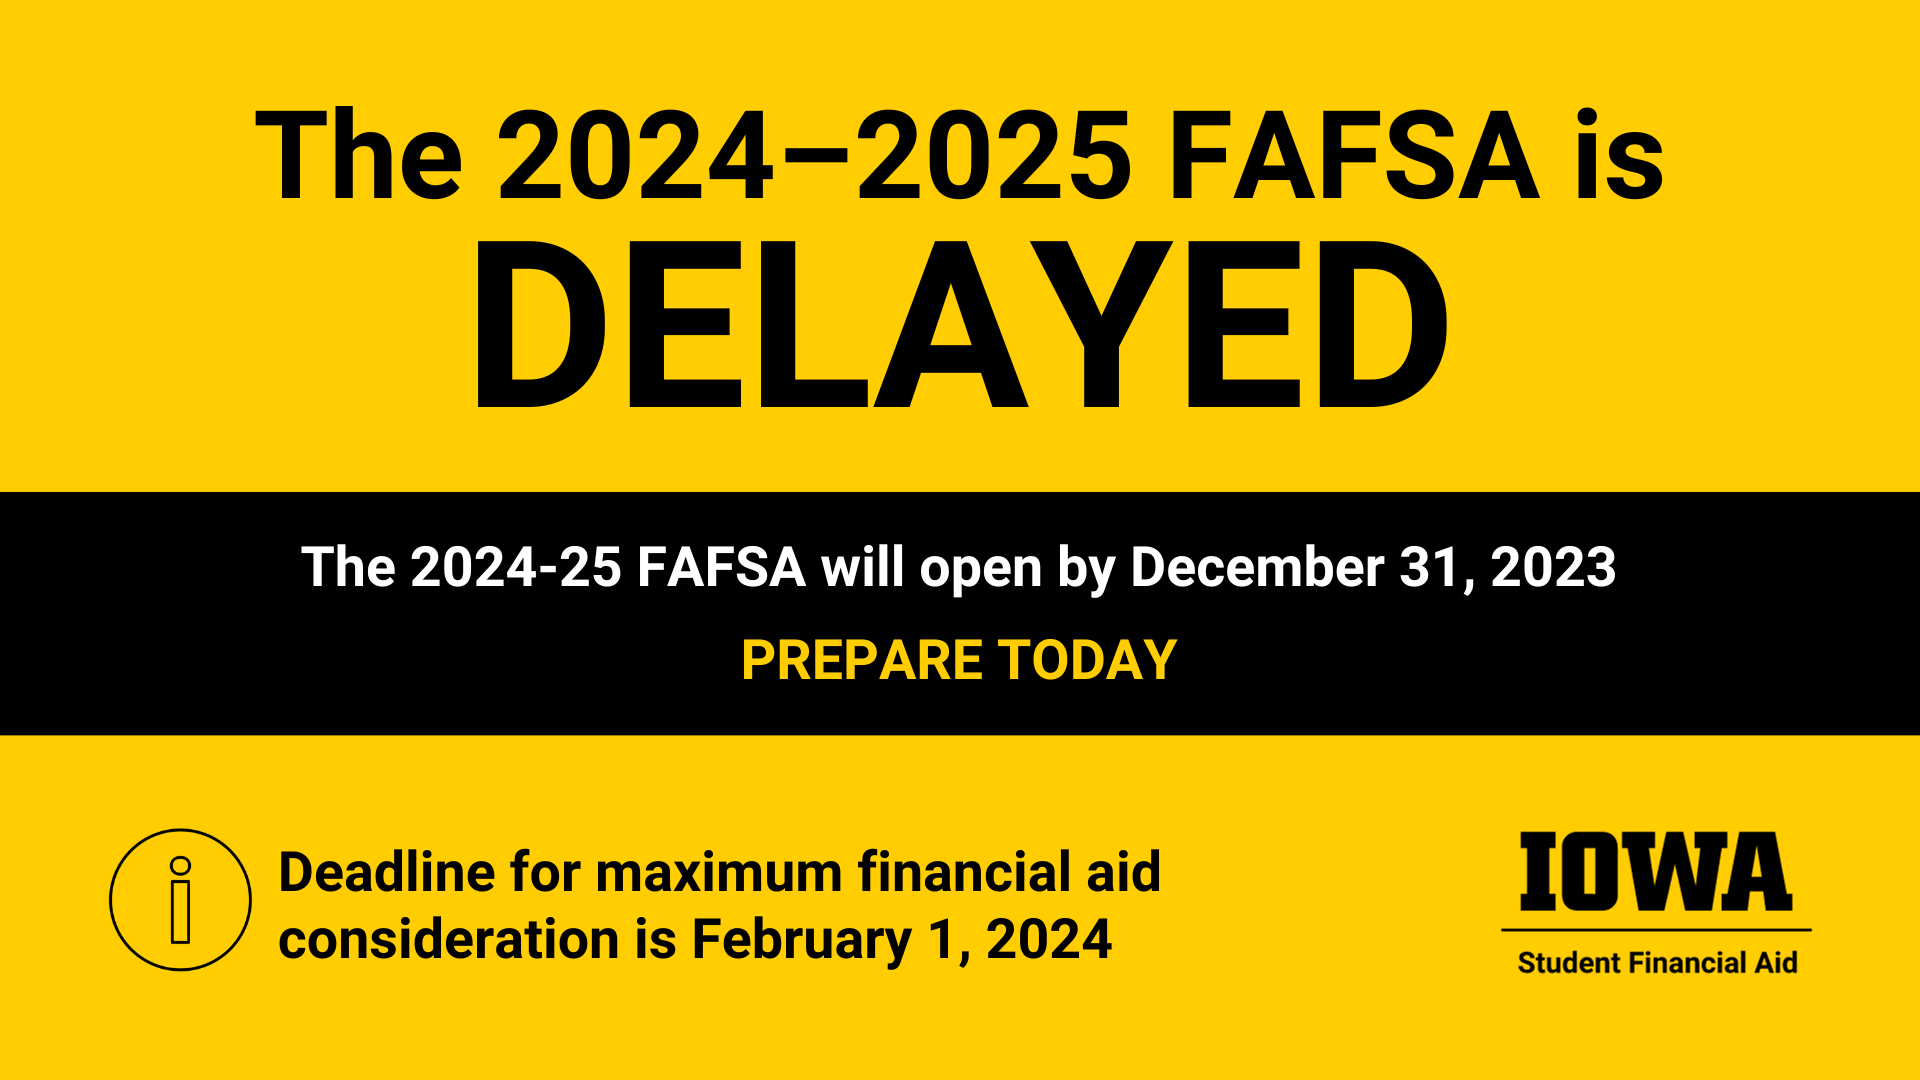 The 2024-2025 FAFSA is delayed. It will open by December 31. Prepare Today. Deadline for maximum aid consideration is February 1, 2024